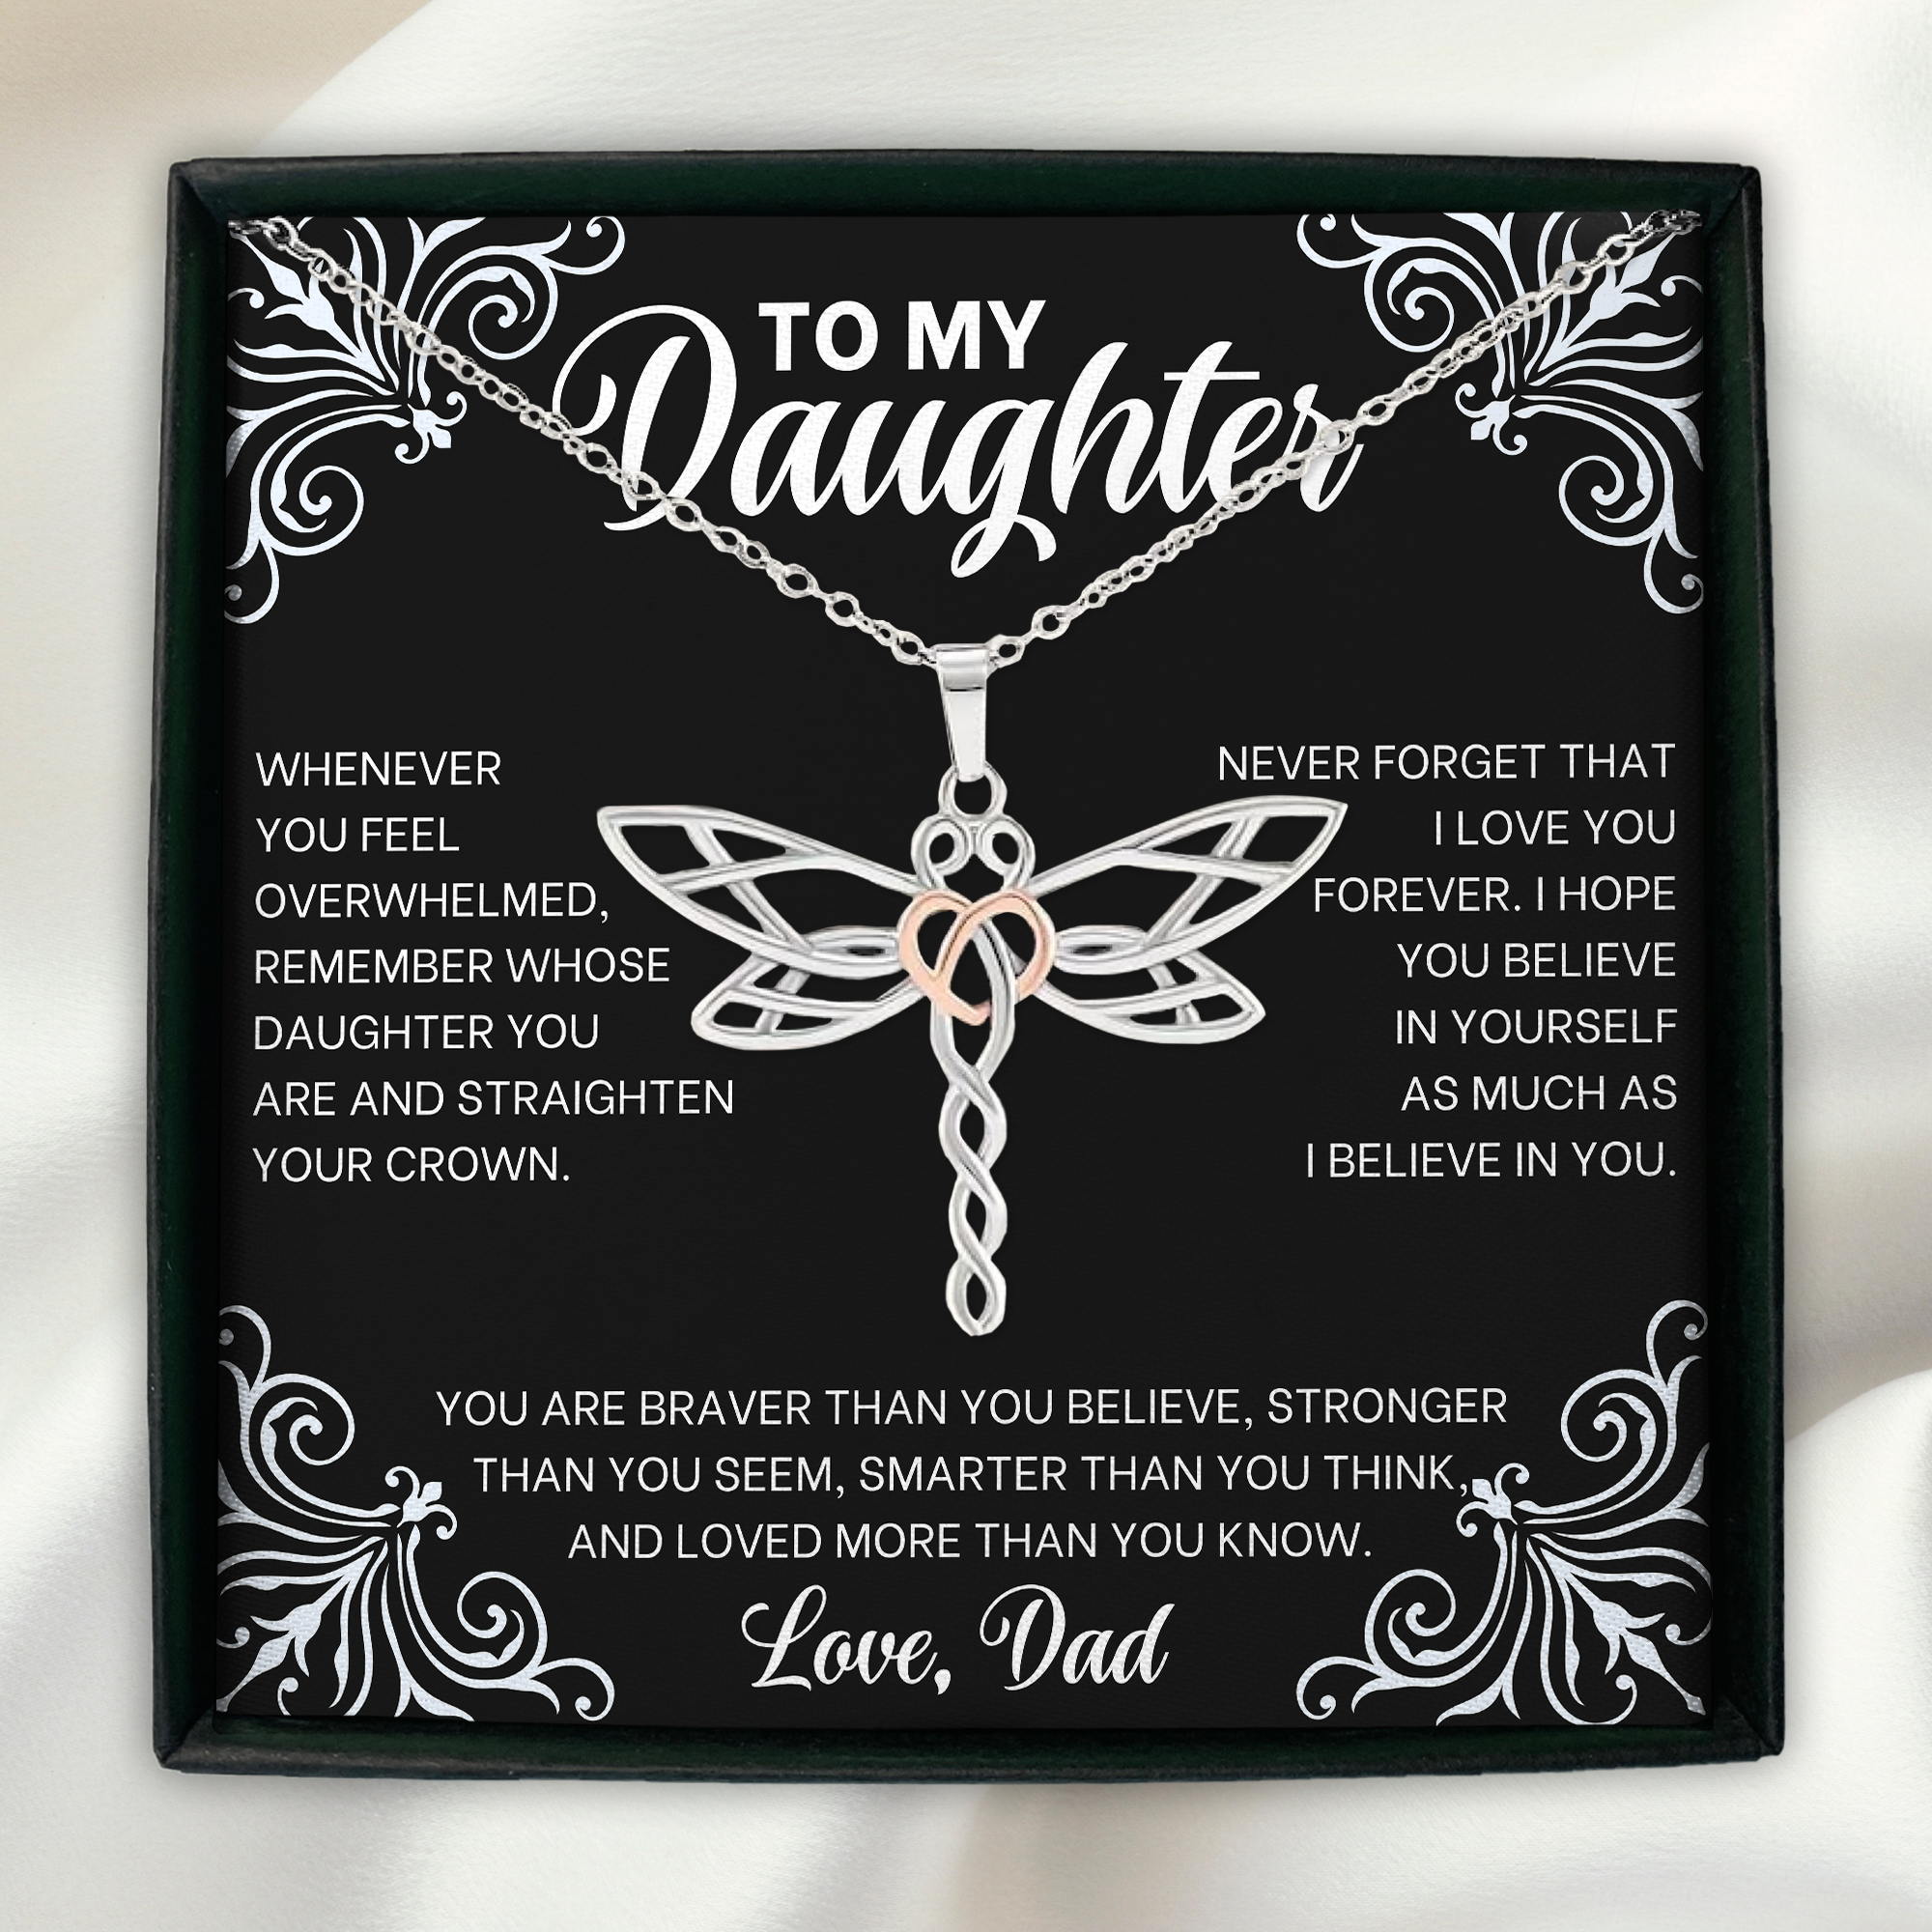 To My Daughter Dragonfly Necklace Gift From Dad, Daughter Gift, Inspirational Strength Gift, Daughter Necklace, Sentimental Gift for Her